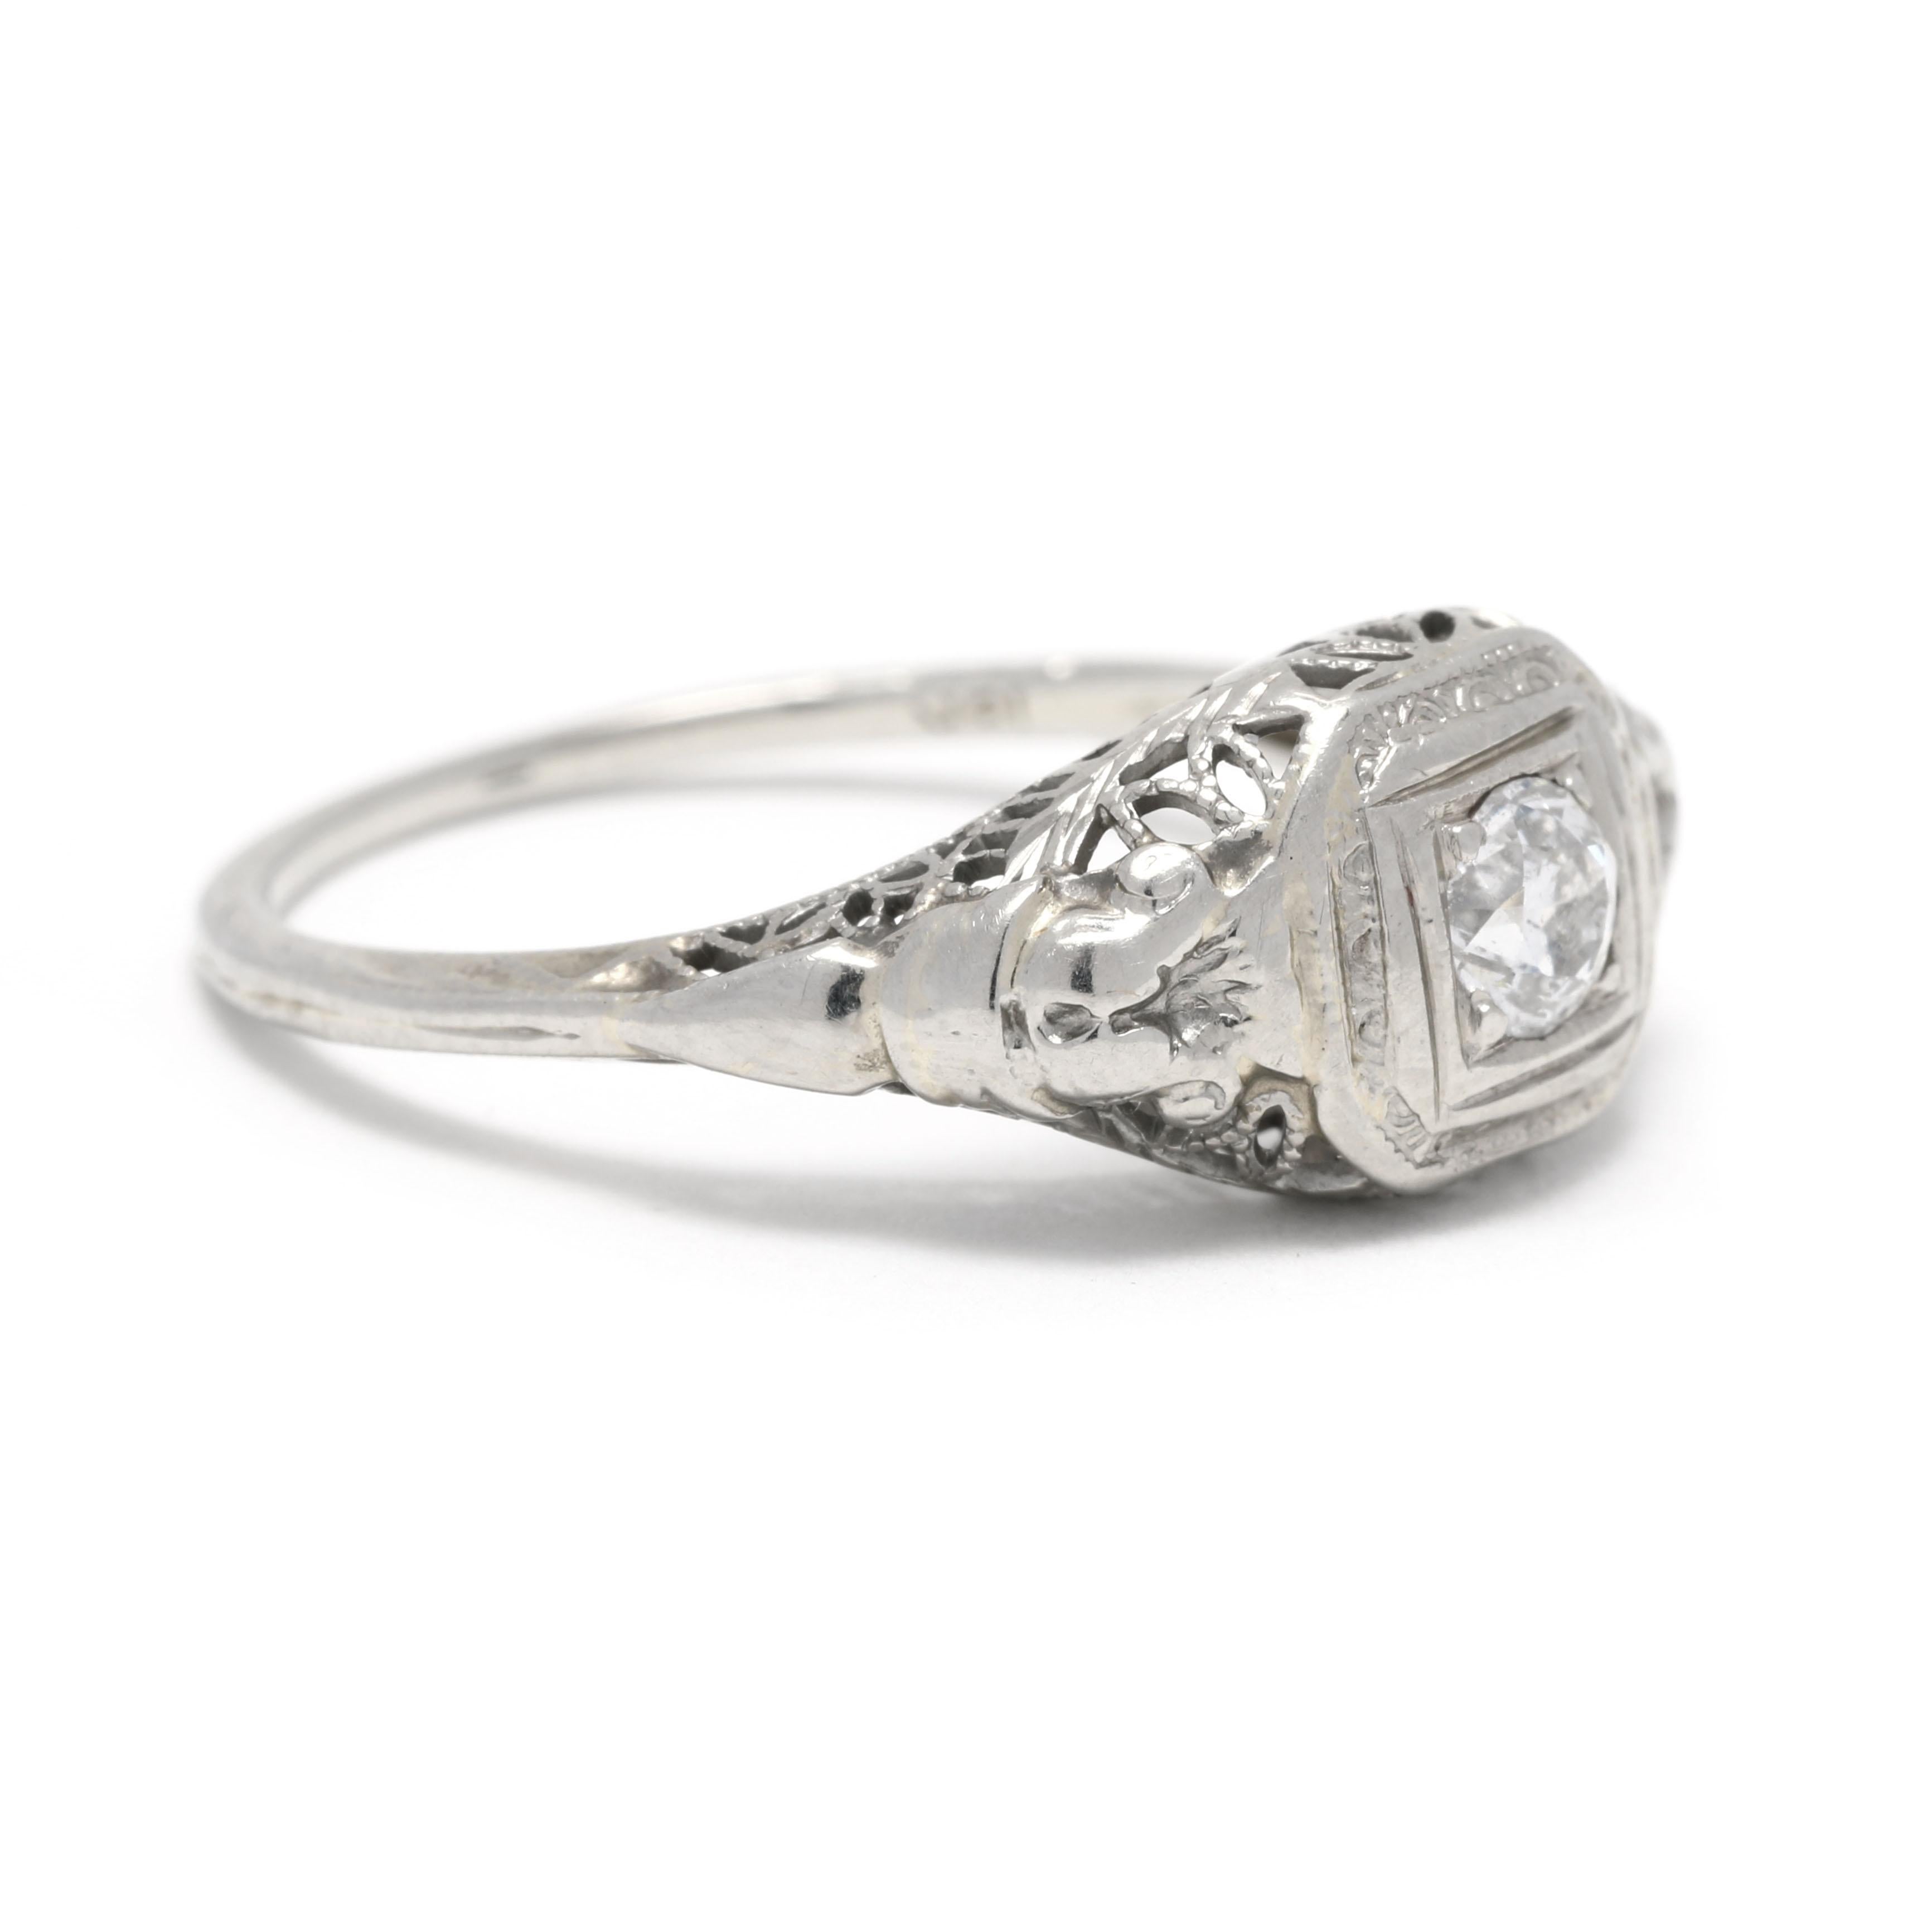 This stunning Art Deco diamond filigree engagement ring is crafted in 18K white gold and features 0.21 carats of dazzling diamonds. The intricate filigree detailing showcases a gorgeous floral design, making it the perfect choice for any romantic